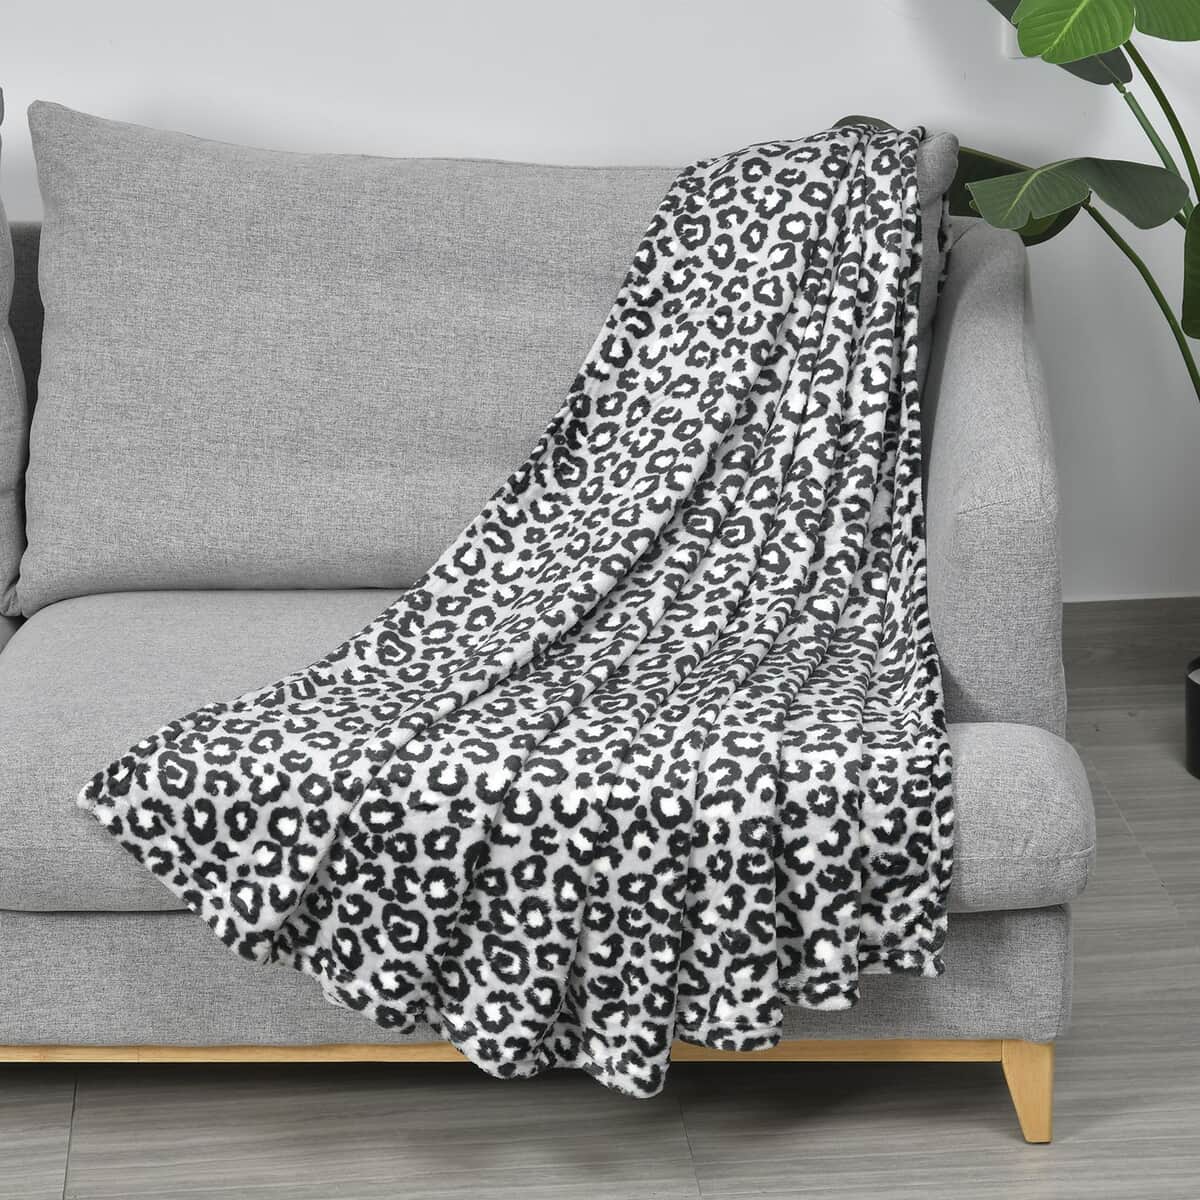 HOMESMART Black and White Striking Leopard Printed Flannel Single Layer Blanket (59"x78.7") image number 0